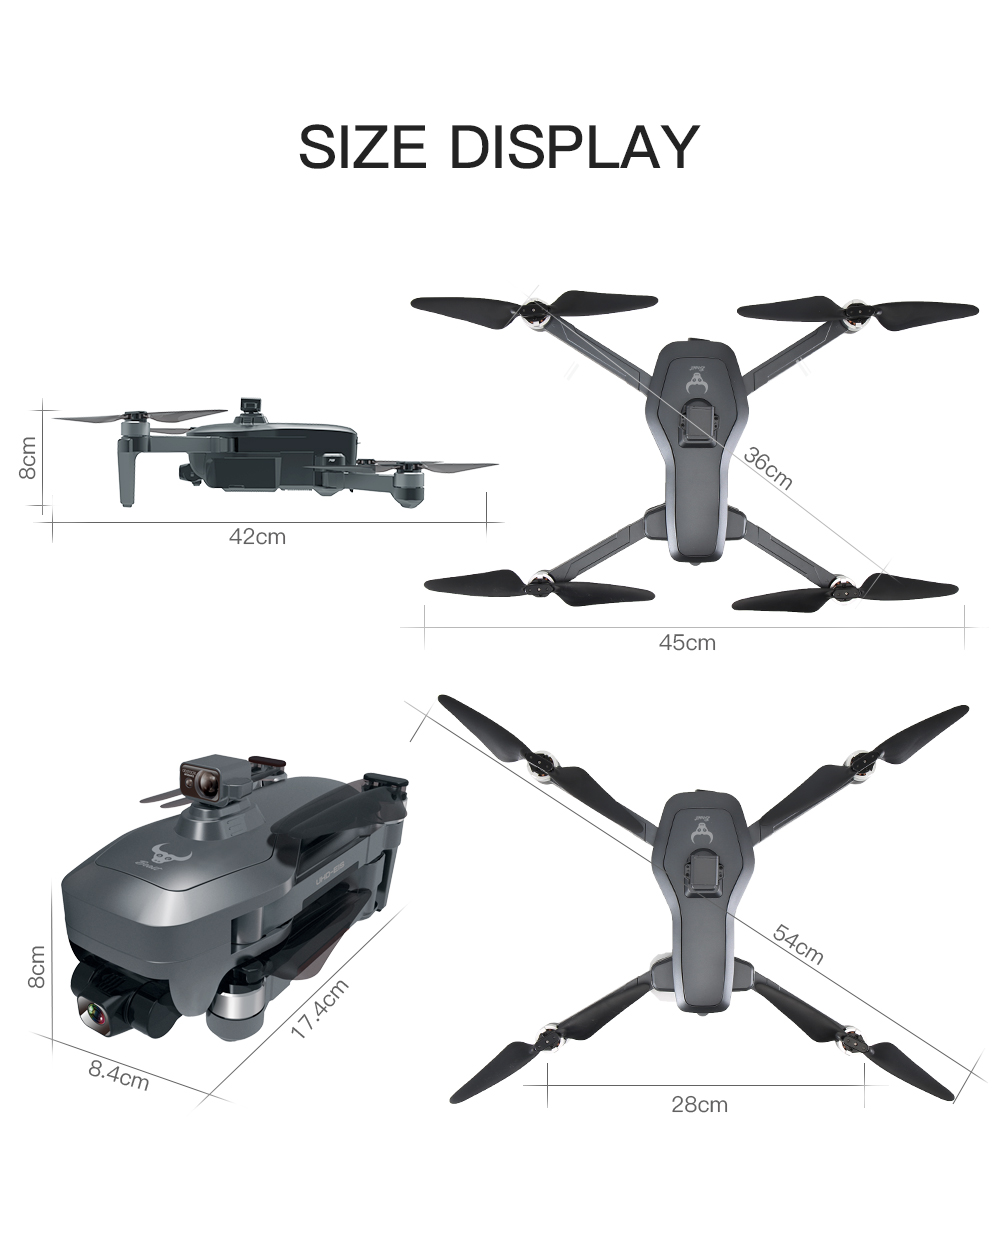 ZLL SG906 MAX GPS 5G WIFI FPV With 4K HD Camera 3-Axis EIS Anti-shake Gimbal Obstacle Avoidance Brushless Foldable RC Drone Quadcopter RTF 136